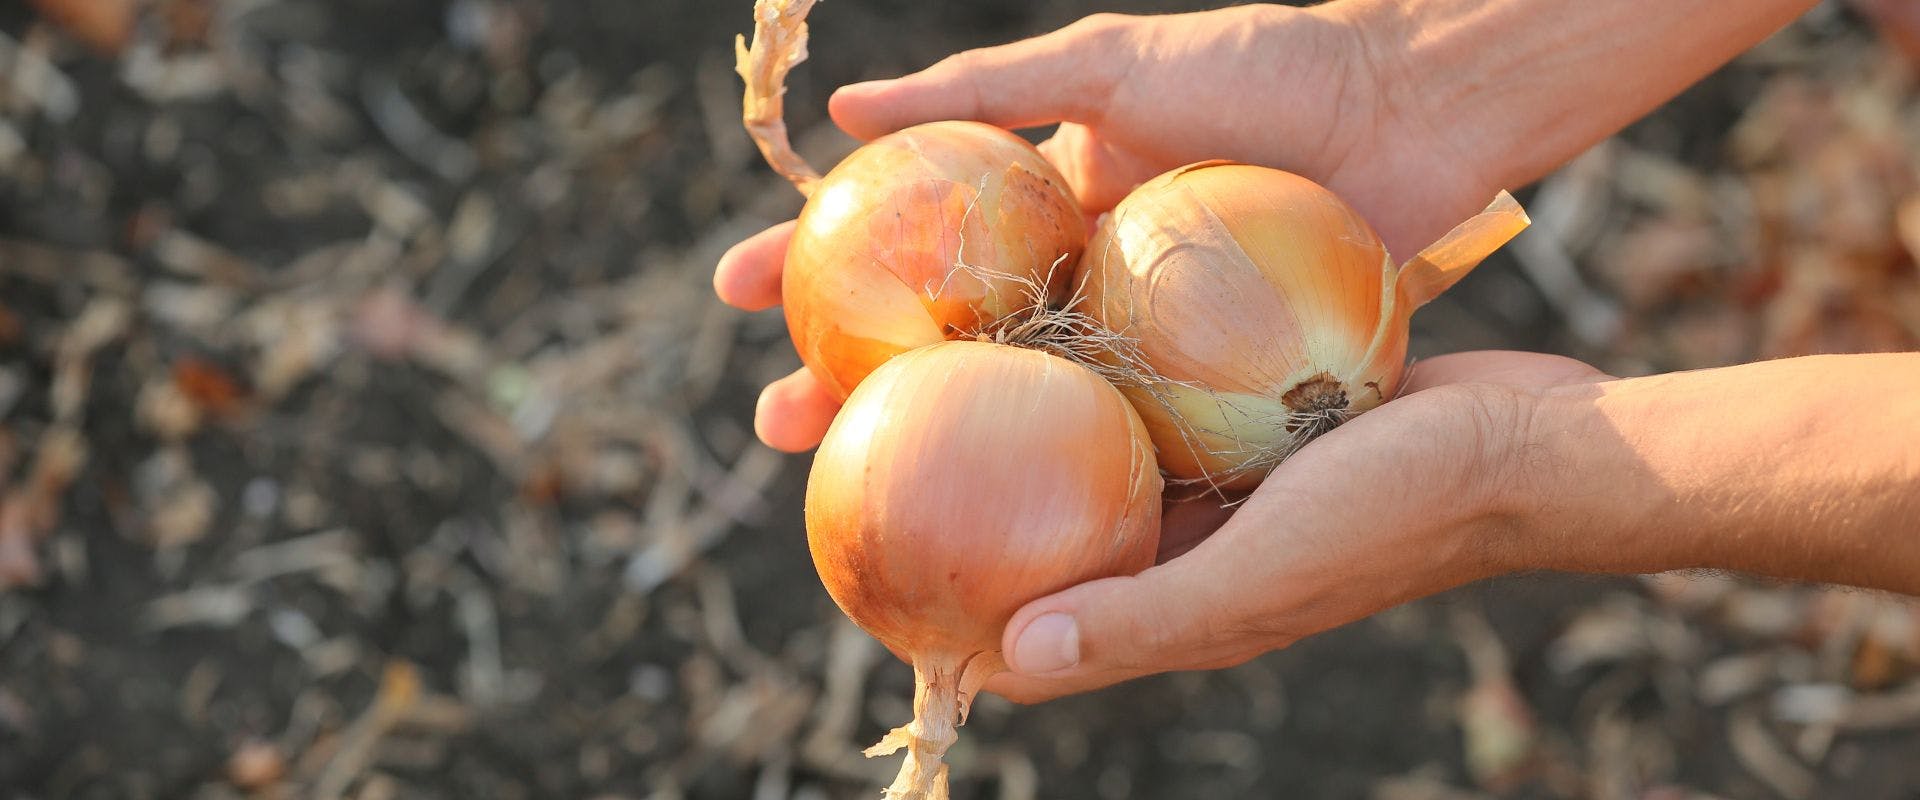 Freshly-harvested onions being held above soil